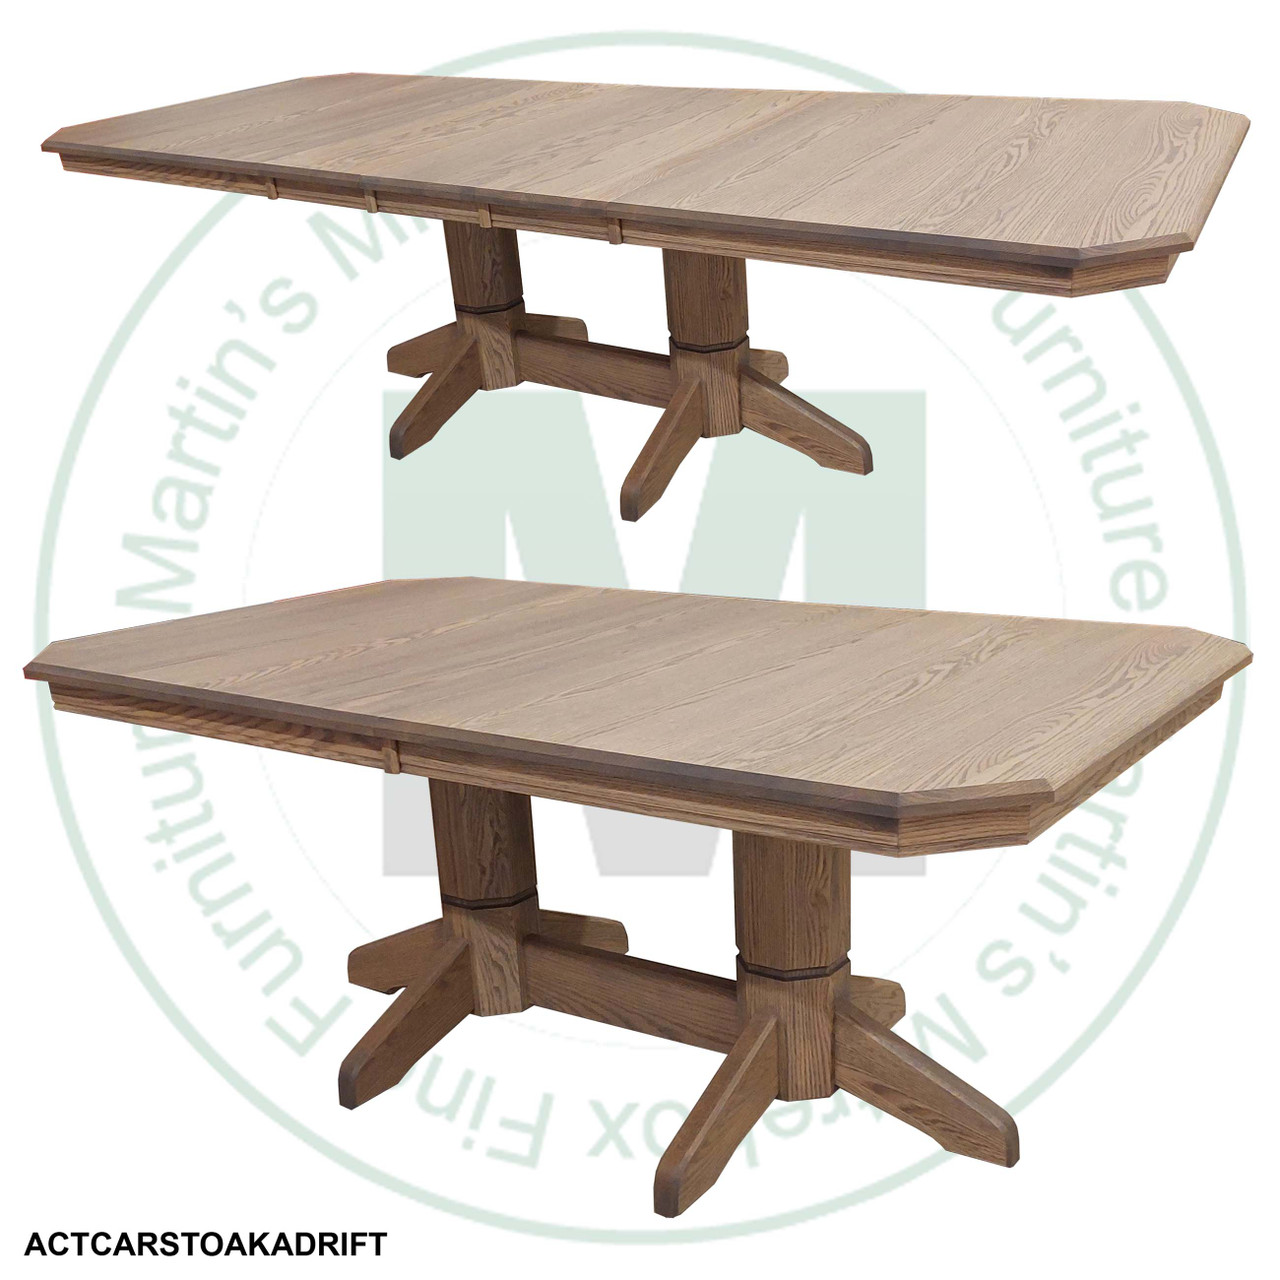 Maple Urban Classic Double Pedestal Table 42''D x 60''W x 30''H With 3 - 12'' Leaves